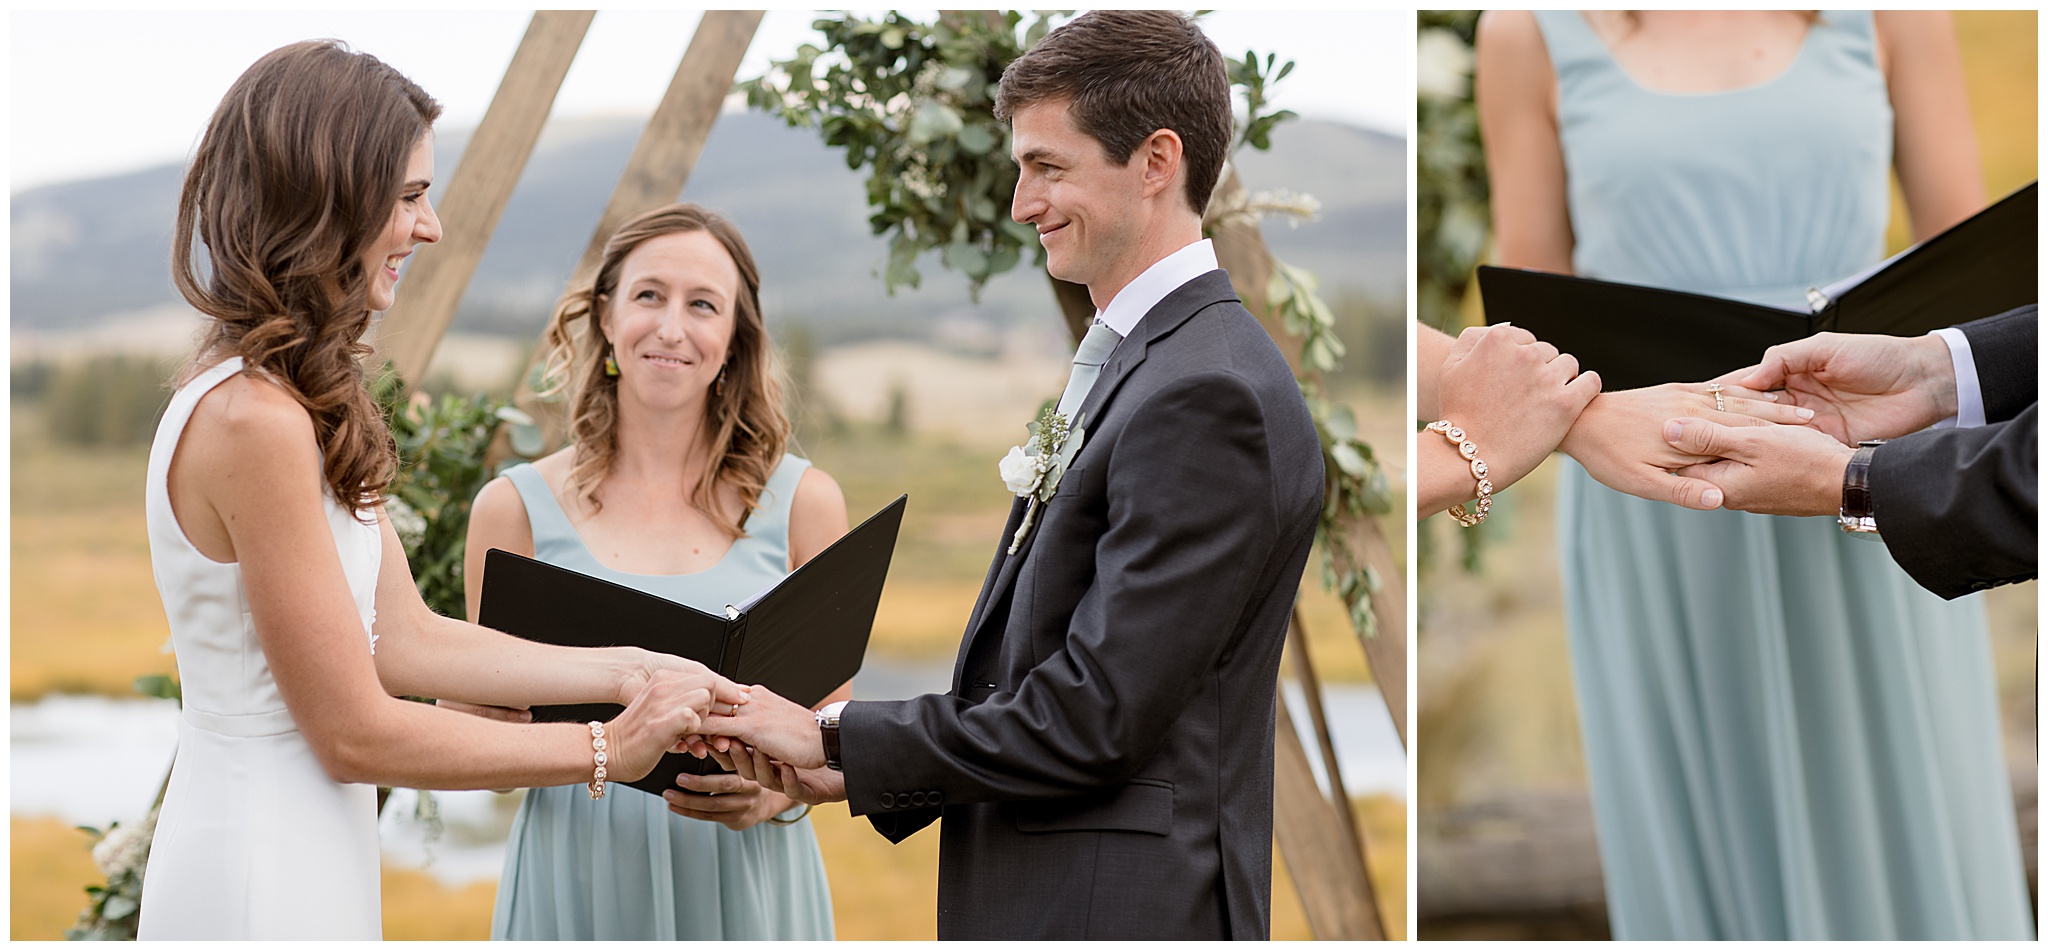 Exchanging of the rings at their small intimate wedding in Breckenridge Colorado